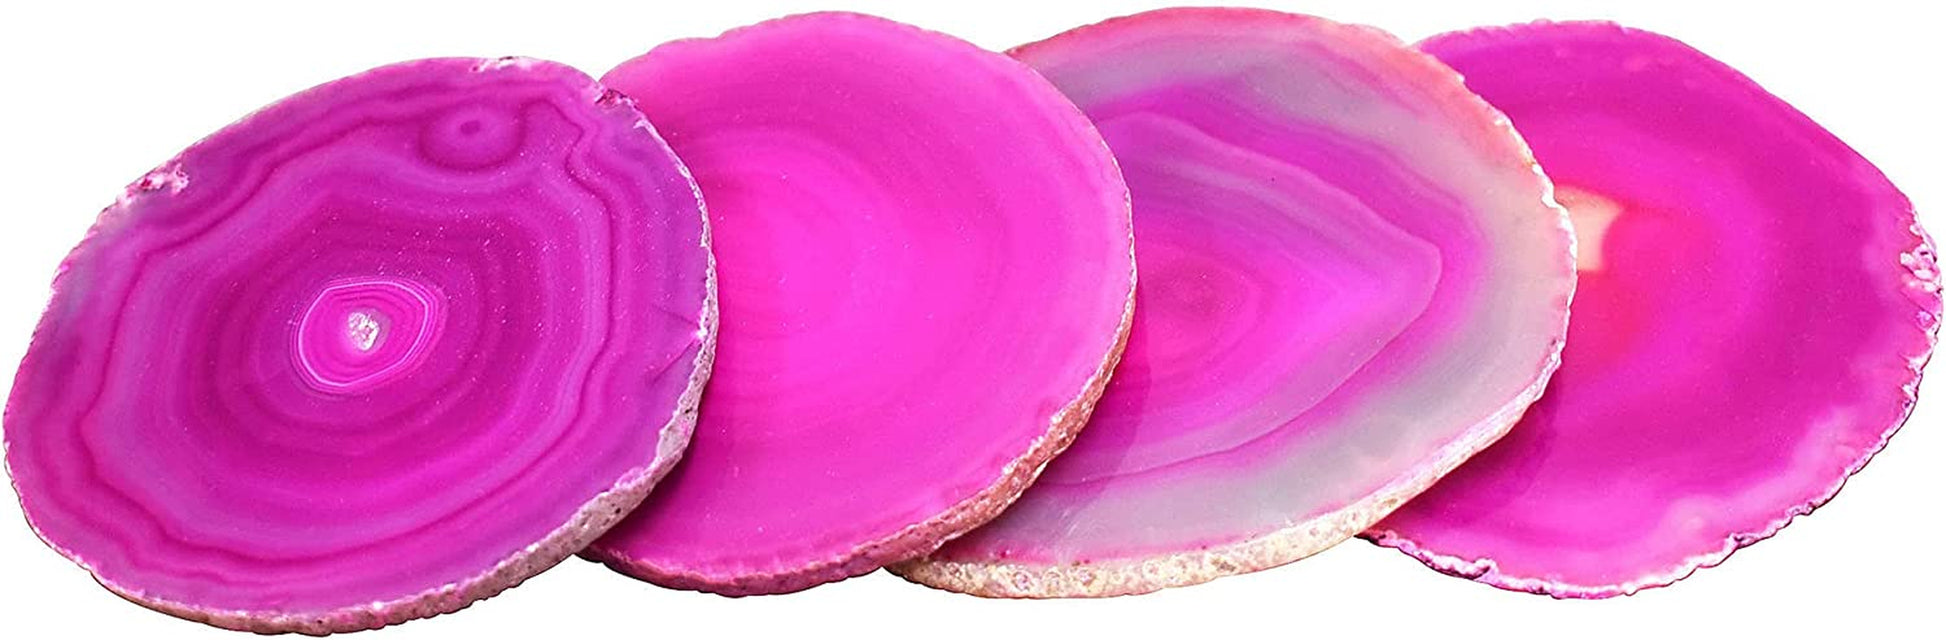 Premium Pink Agate Coasters - Set of 4, Genuine Stone Table Mats for Dining & Drinks Coffee Table & Kitchen Geode Decor Non-Toxic 4.5-5" Diameter